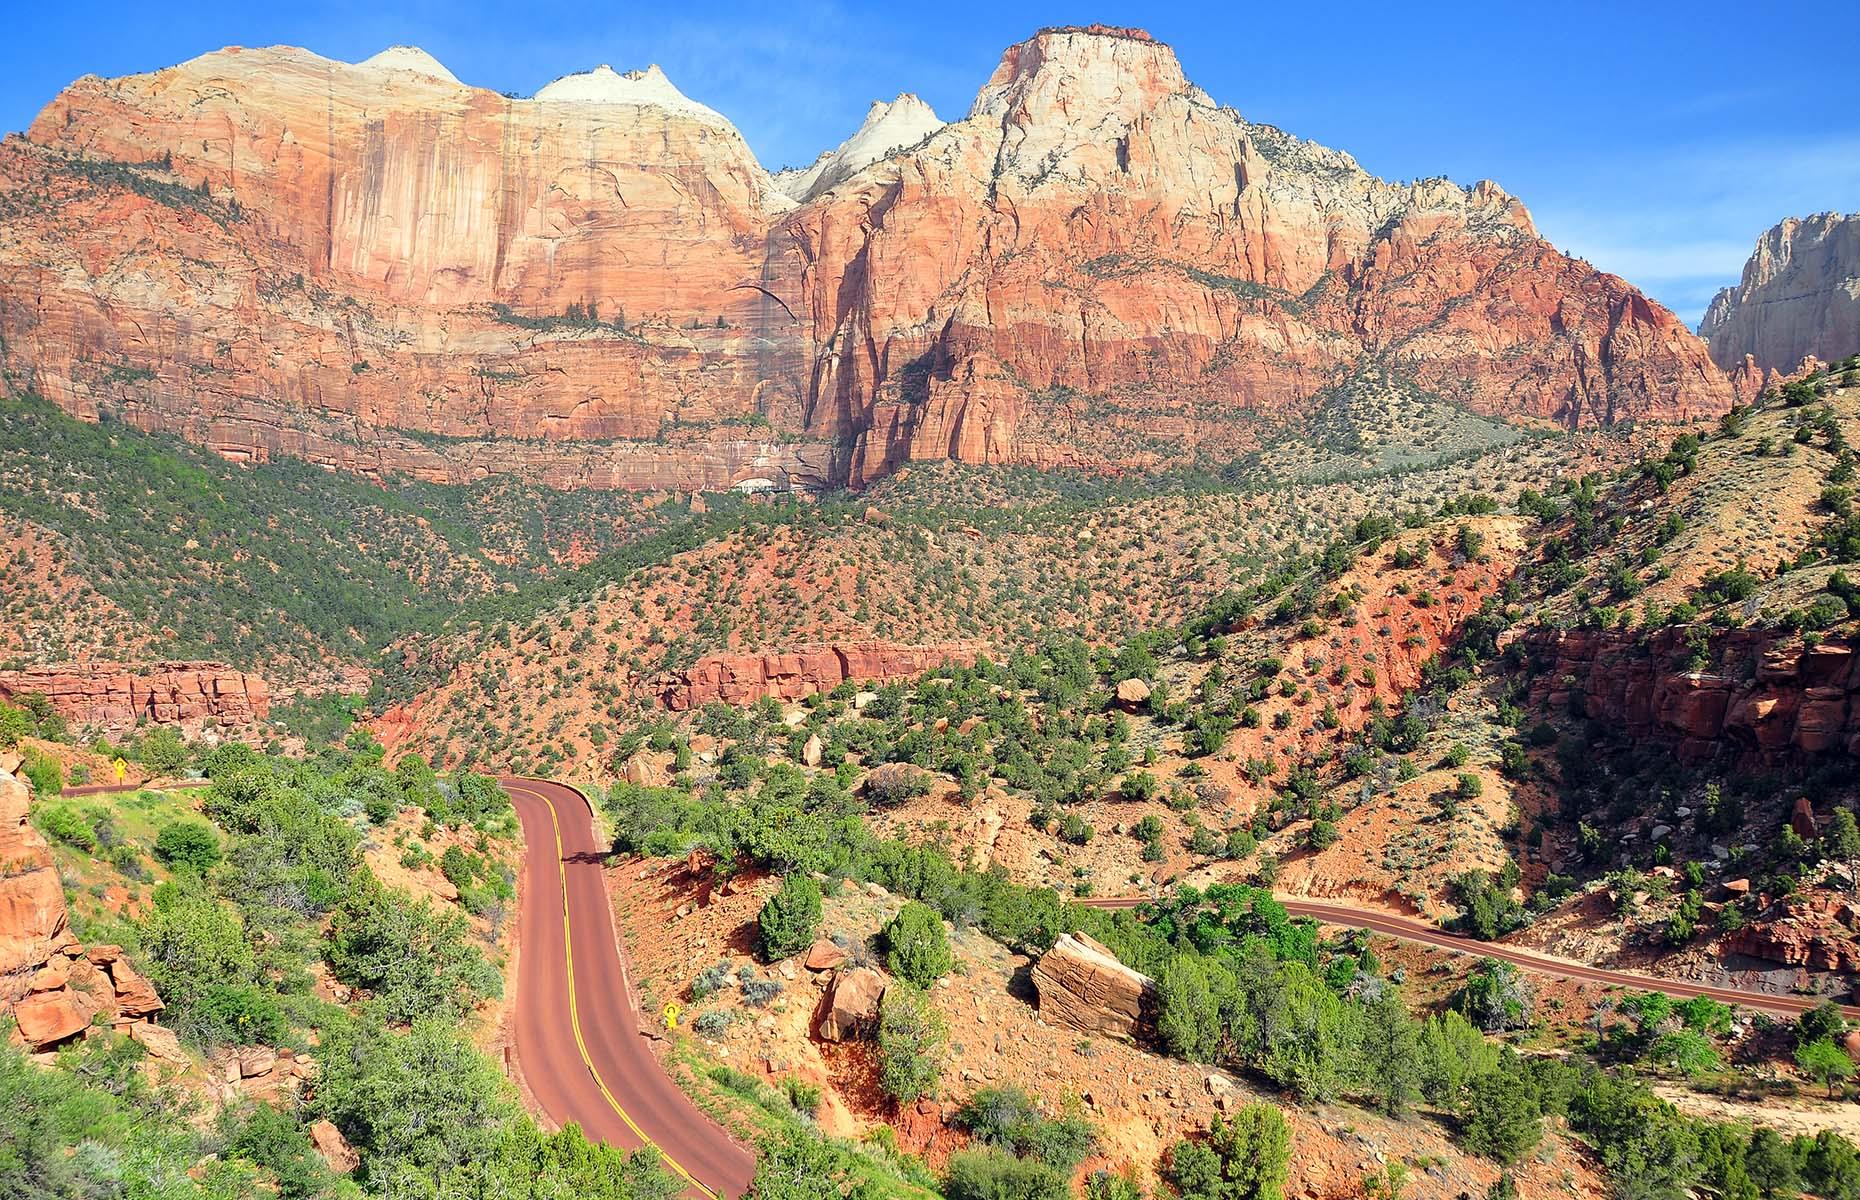 <p>Winding its way through one of the state's most famous landscapes, the <a href="https://utah.com/scenic-drive/zion-national-park">Zion Scenic Byway</a> follows Utah State Route 9, from La Verkin to the south entrance of the Zion National Park. The drive then takes in towering mesas, hoodoos and sandstone cliffs as it follows the Zion-Mount Carmel Highway to the park's east entrance. Break up the drive with a hike – explore the ghost town of Grafton, an abandoned spot featured in 1969 western <em>Butch Cassidy and the Sundance Kid</em>.</p>